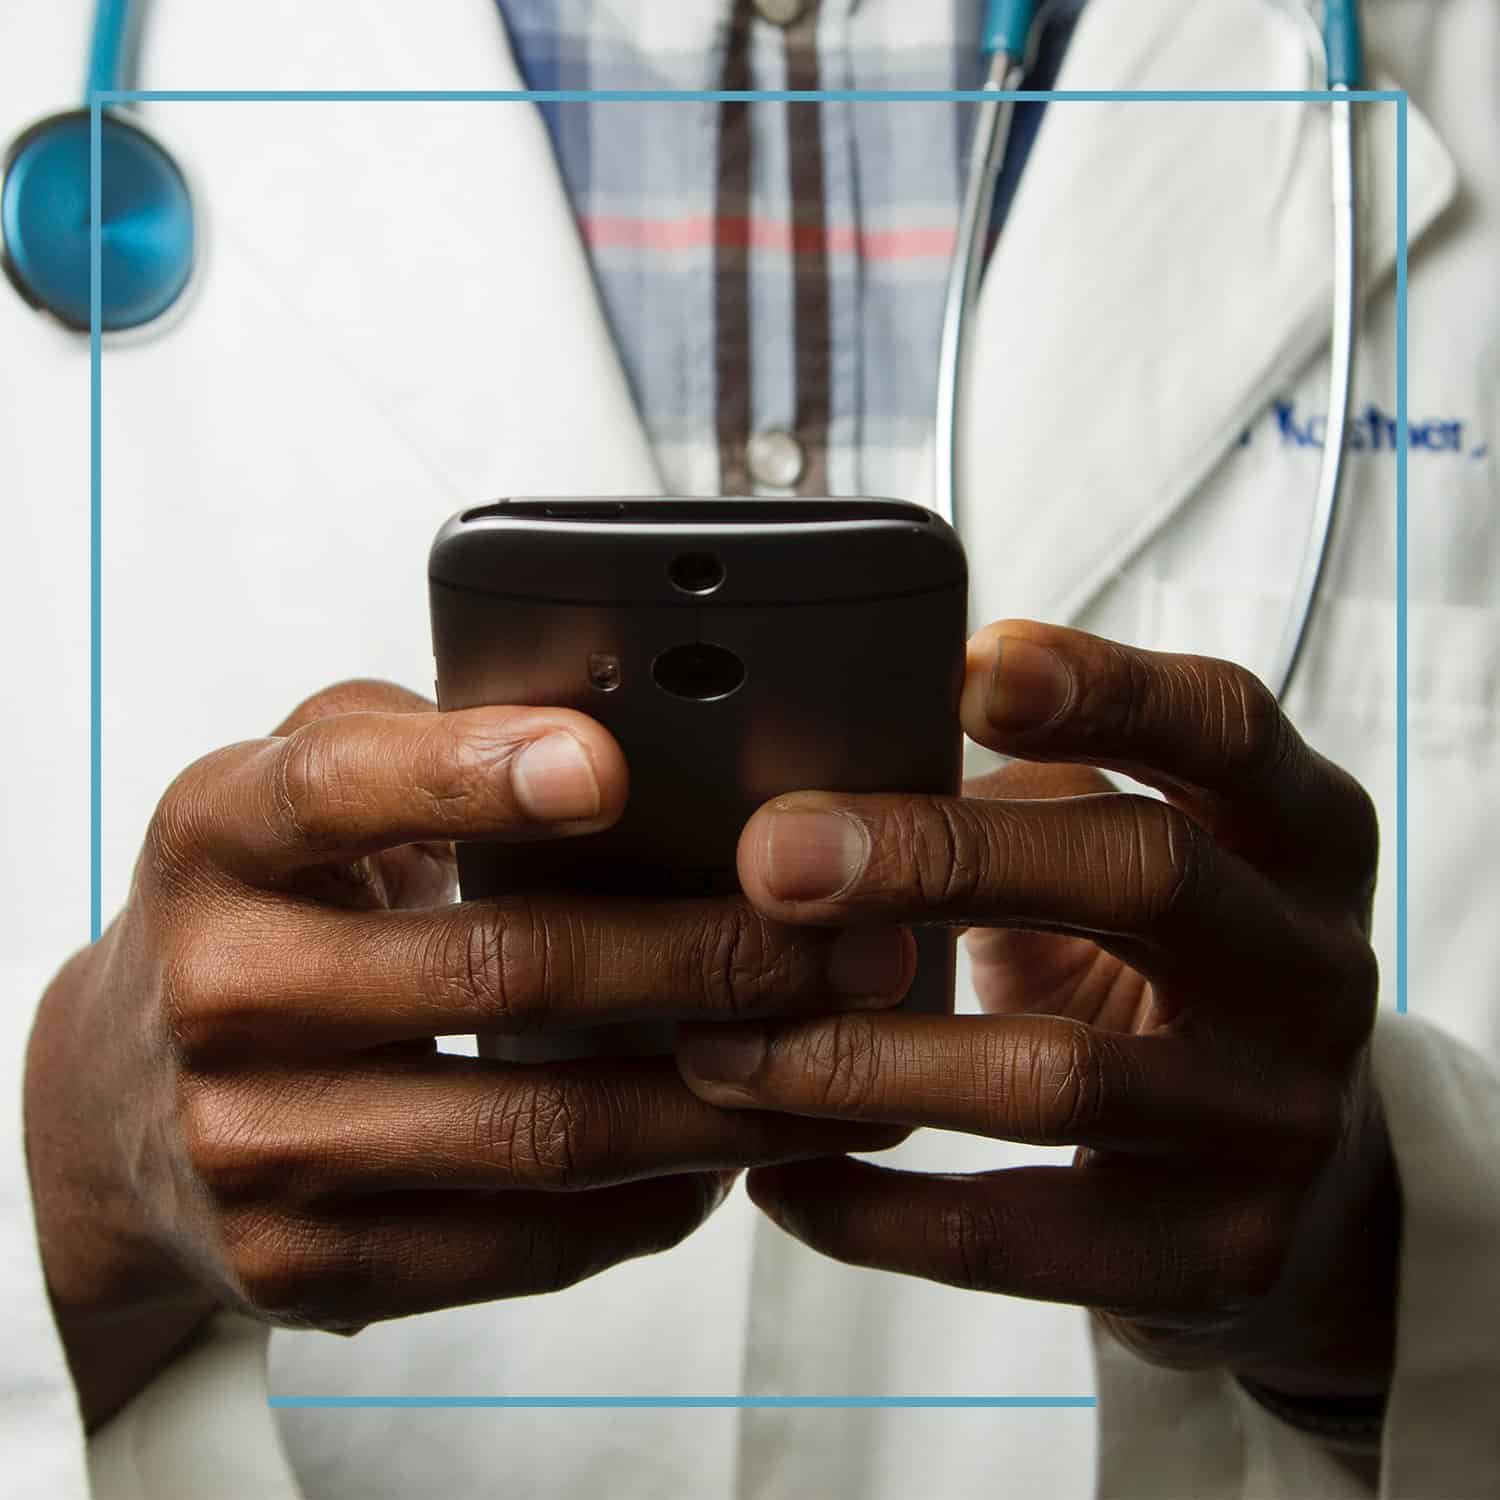 Doctor wearing a stethoscope looking at the screen on his phone